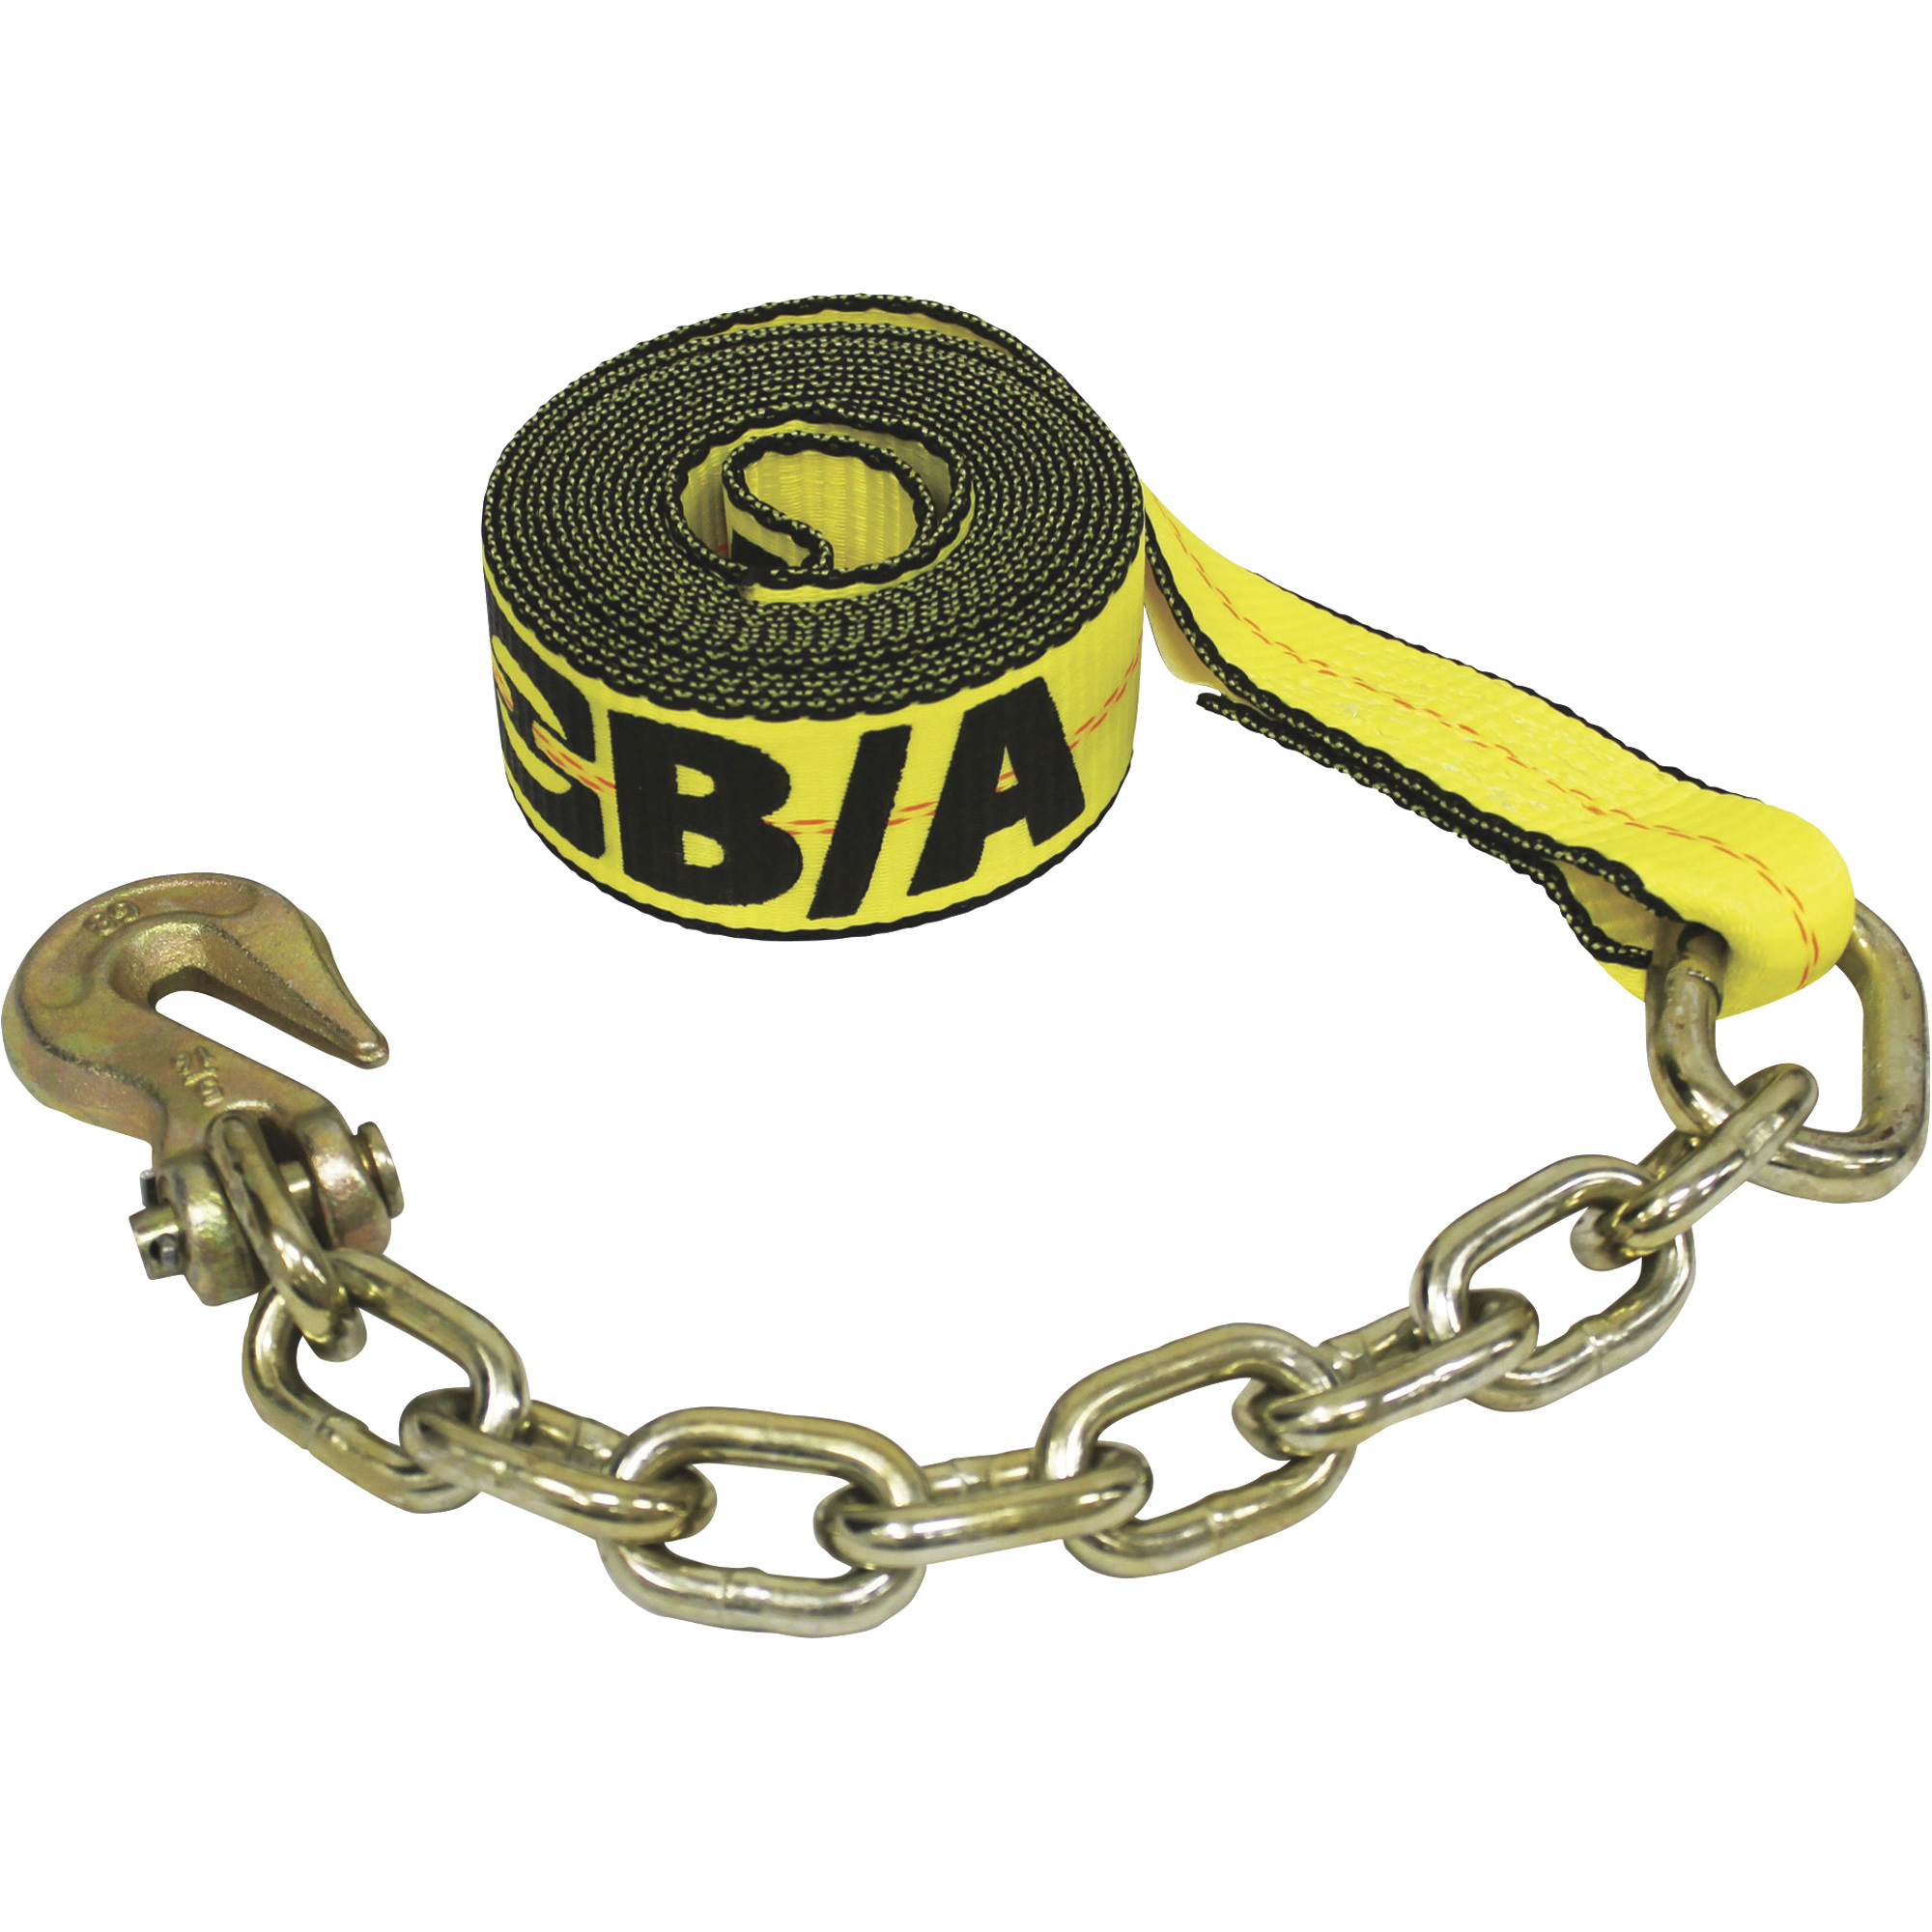 2Inch x 14ft. Polyester Strap With 12Inch Chain and Grab Hook — 4000-Lb. Working Load, Model - B/A Products 38-200C-LG